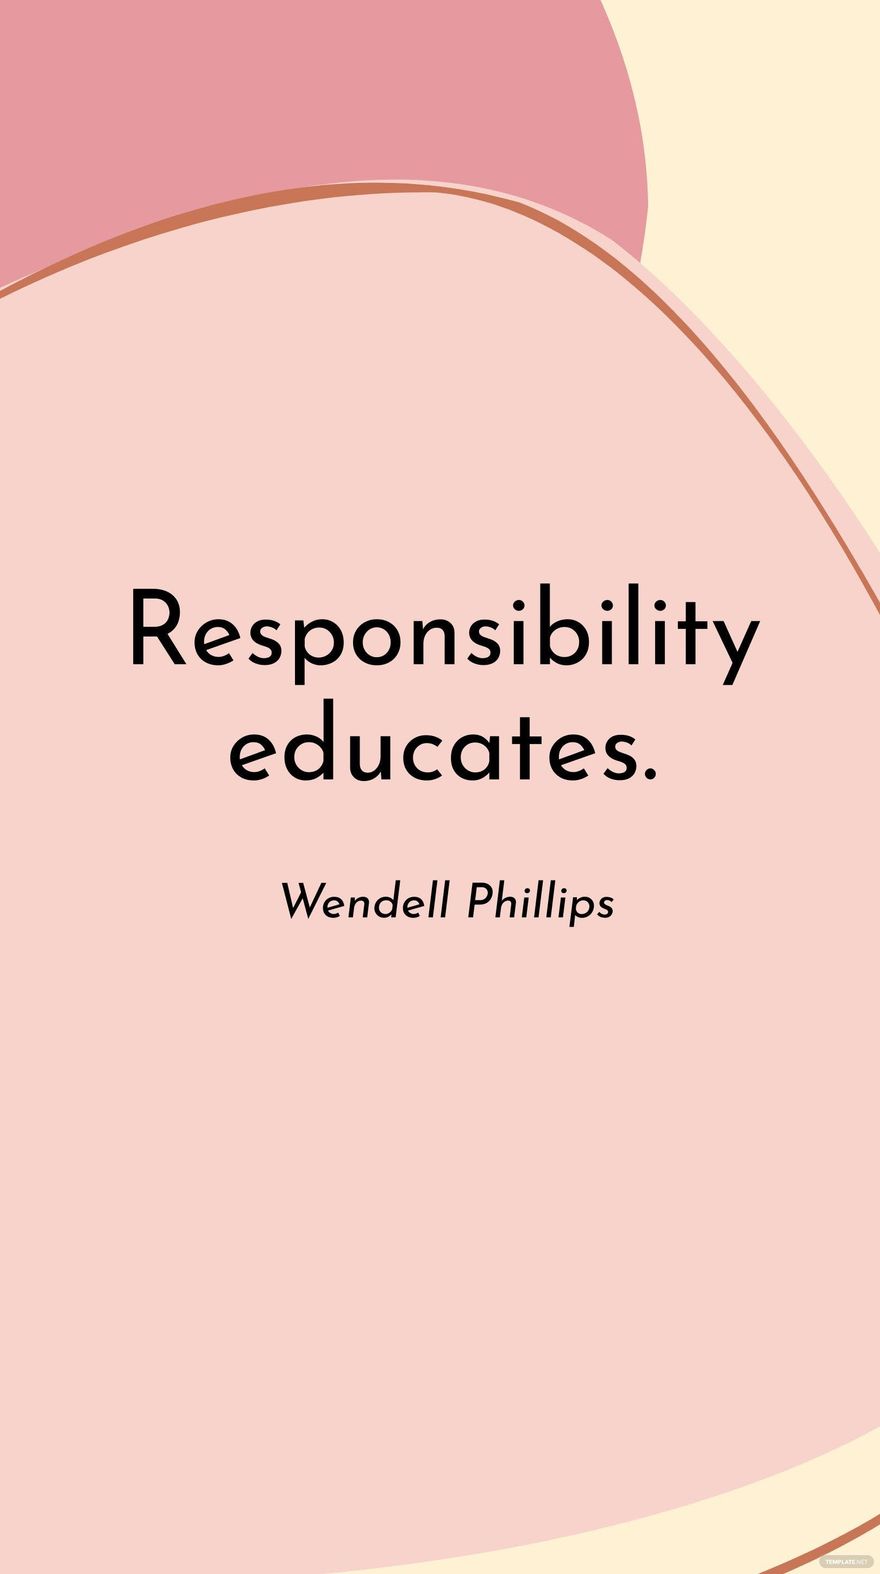 Free Wendell Phillips - Responsibility educates. in JPG